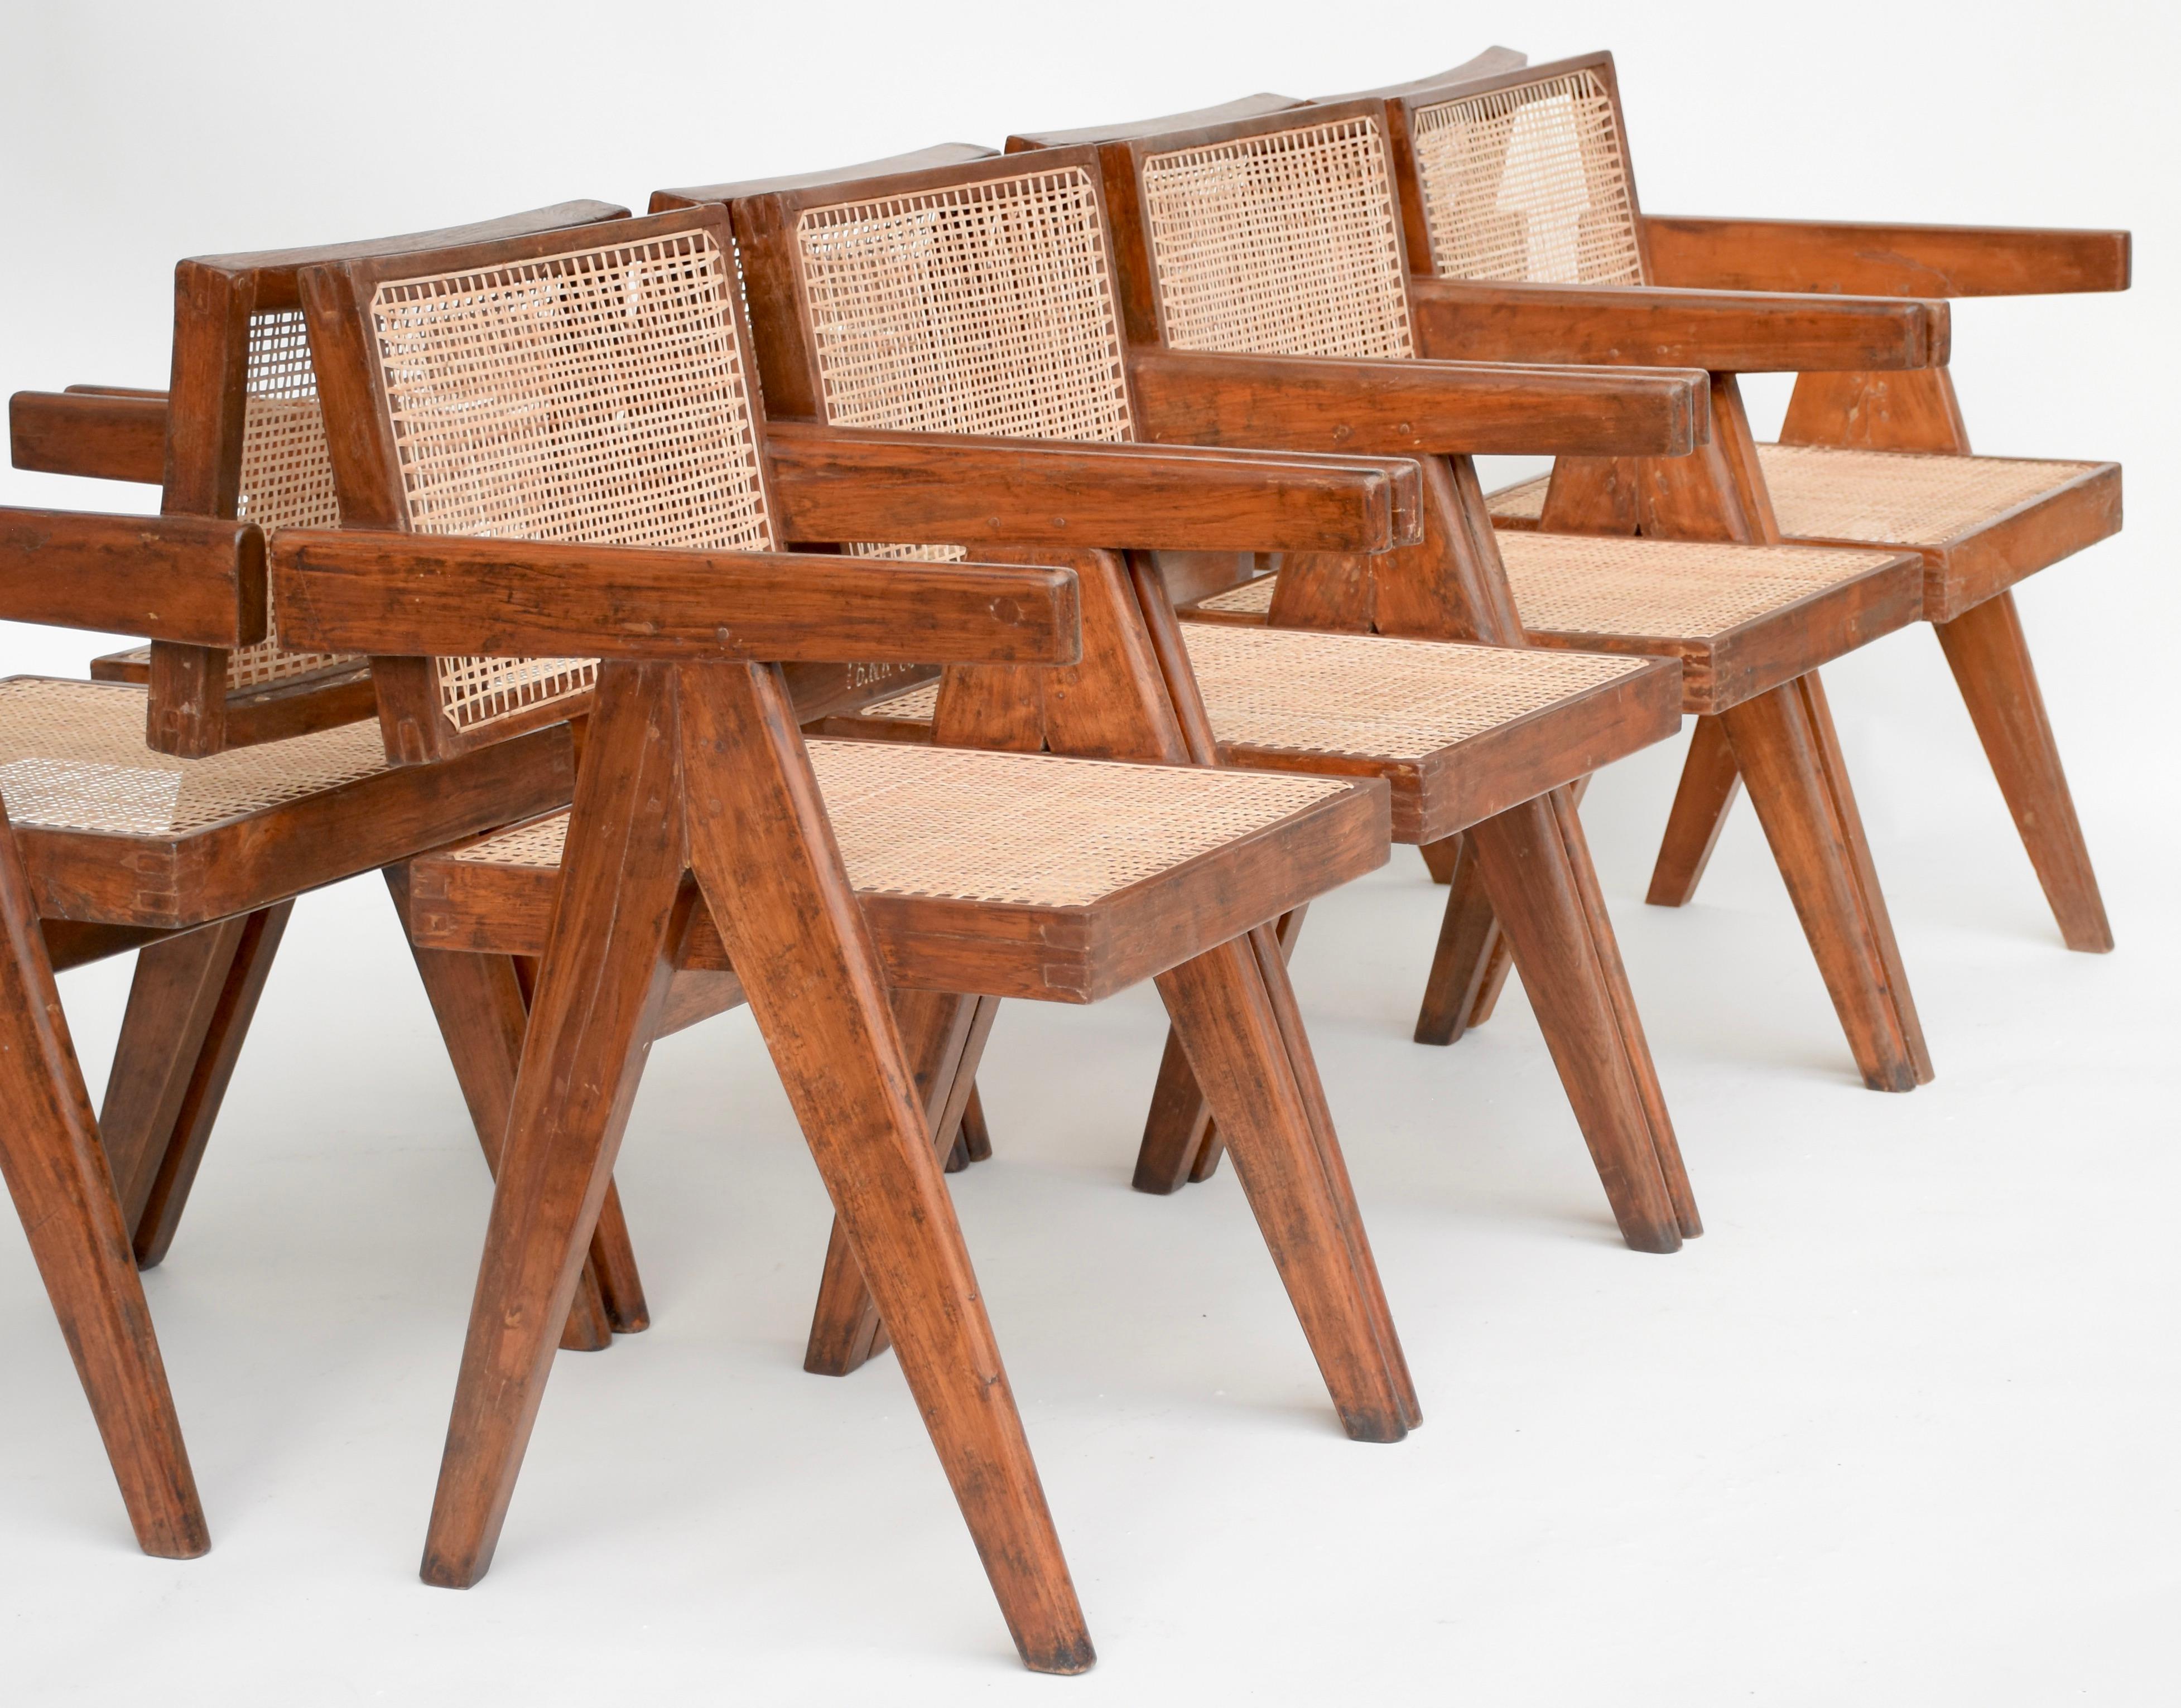 Teak Pierre Jeanneret Set of 8 Office Cane Chairs Ca. 1955-1960 from Chandigarh For Sale